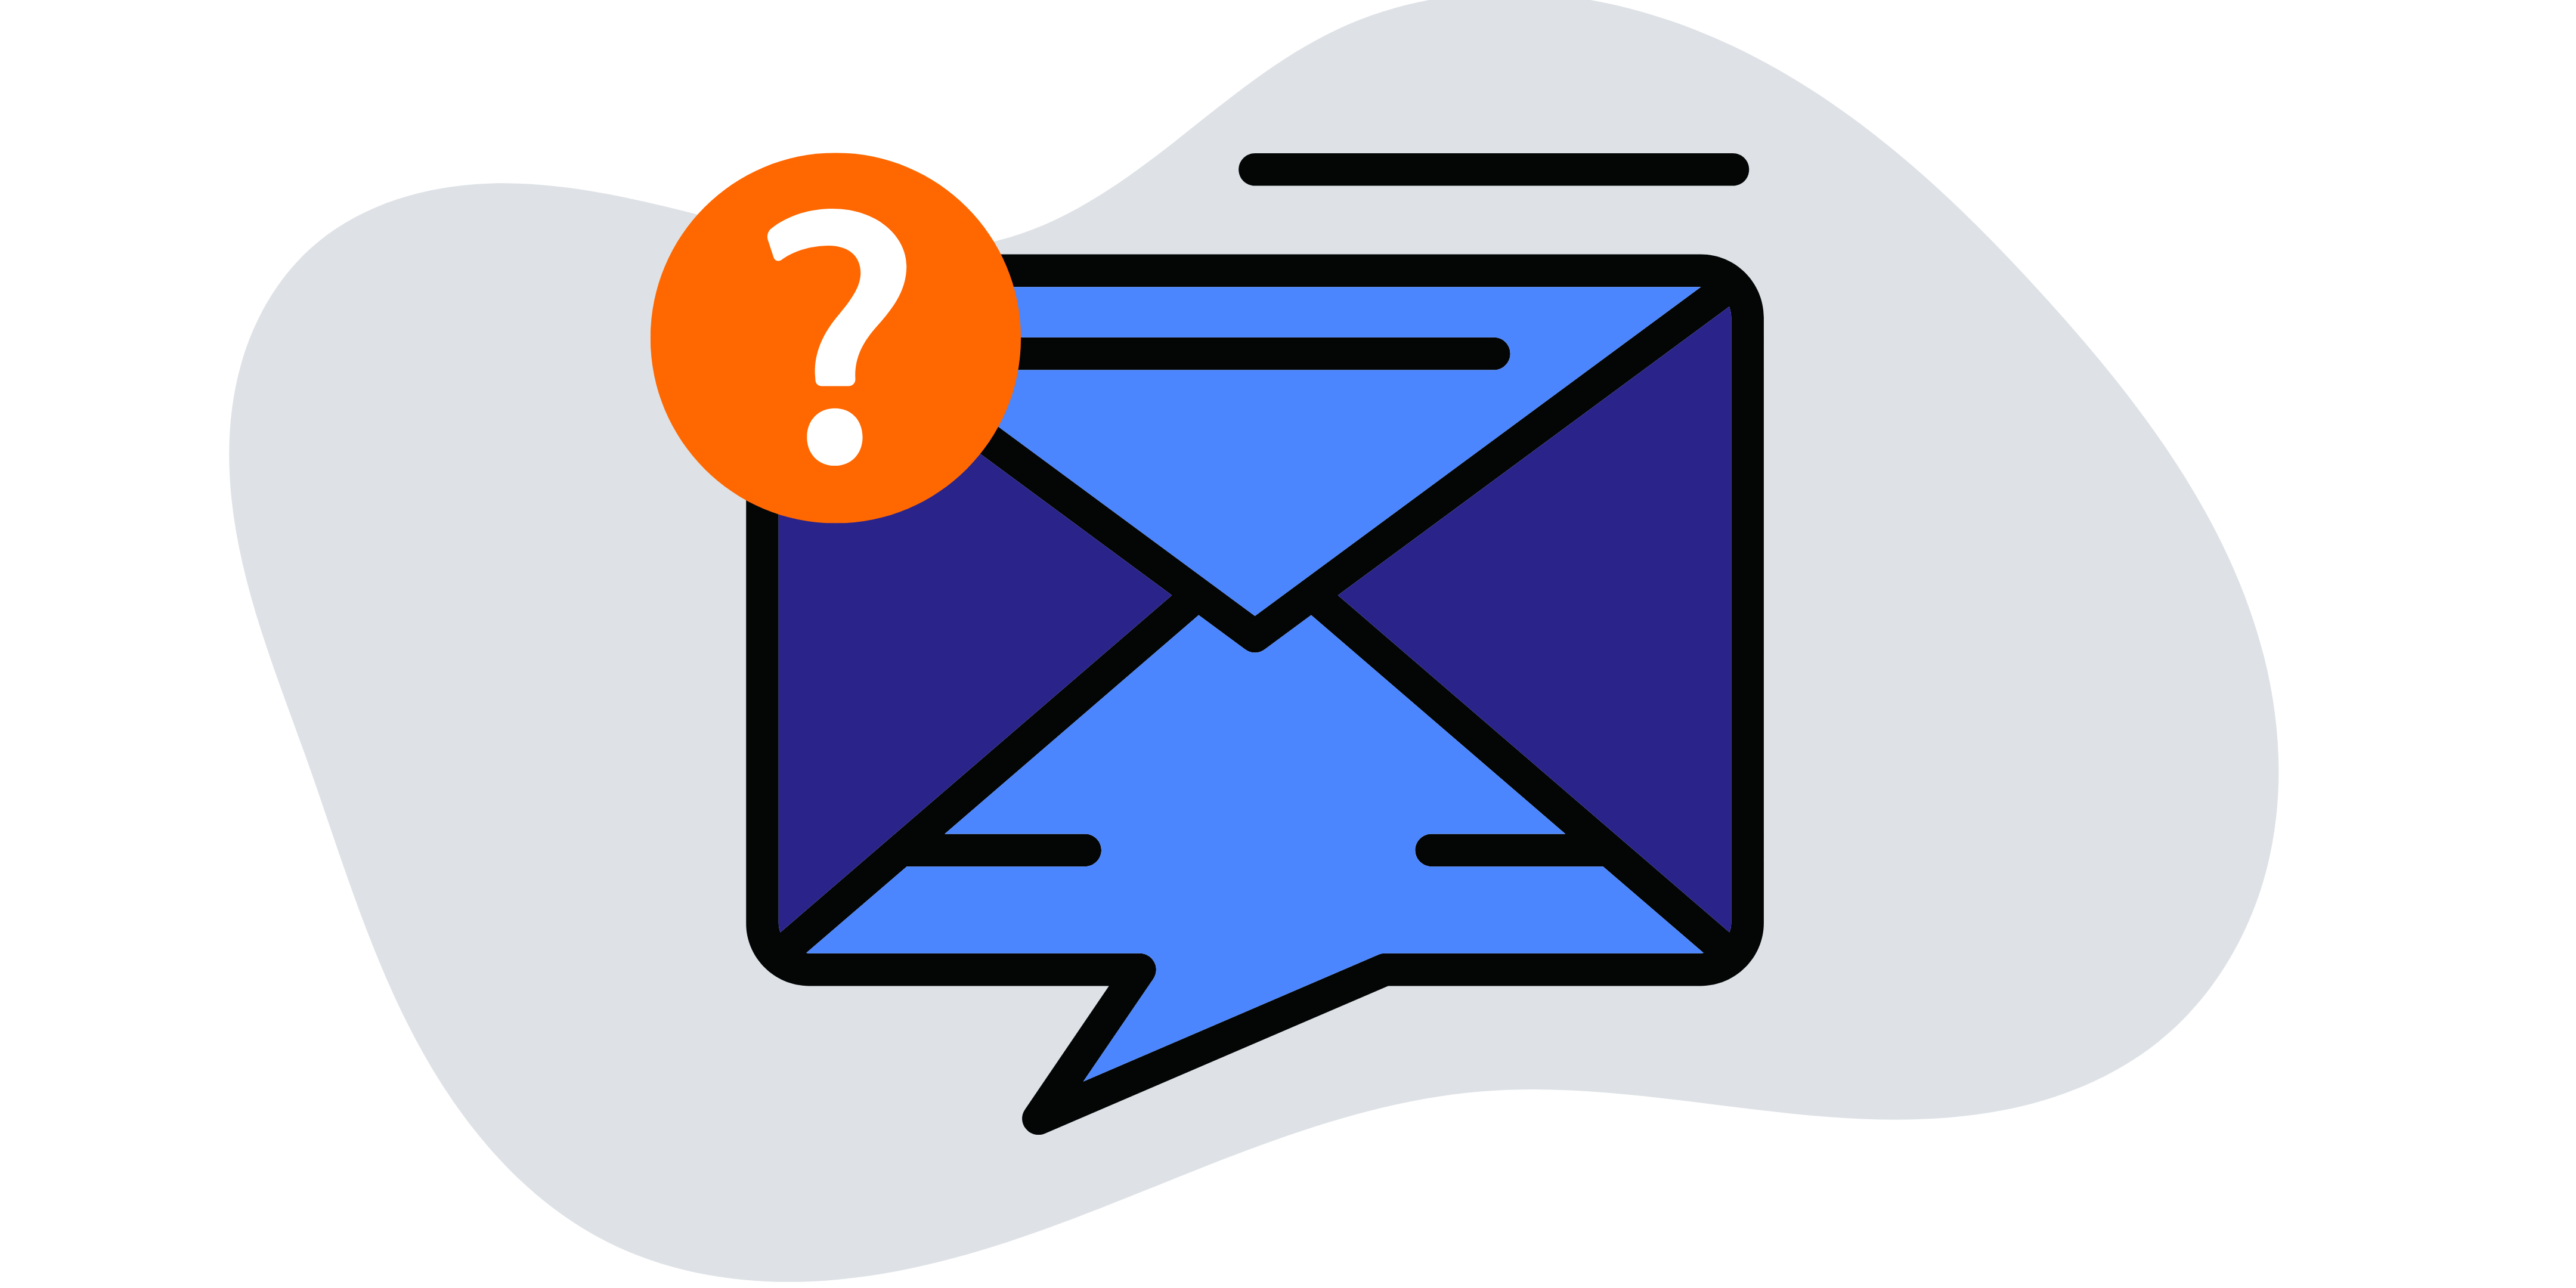 https://www.valimail.com/wp-content/uploads/2016/02/gmail-question-mark.png